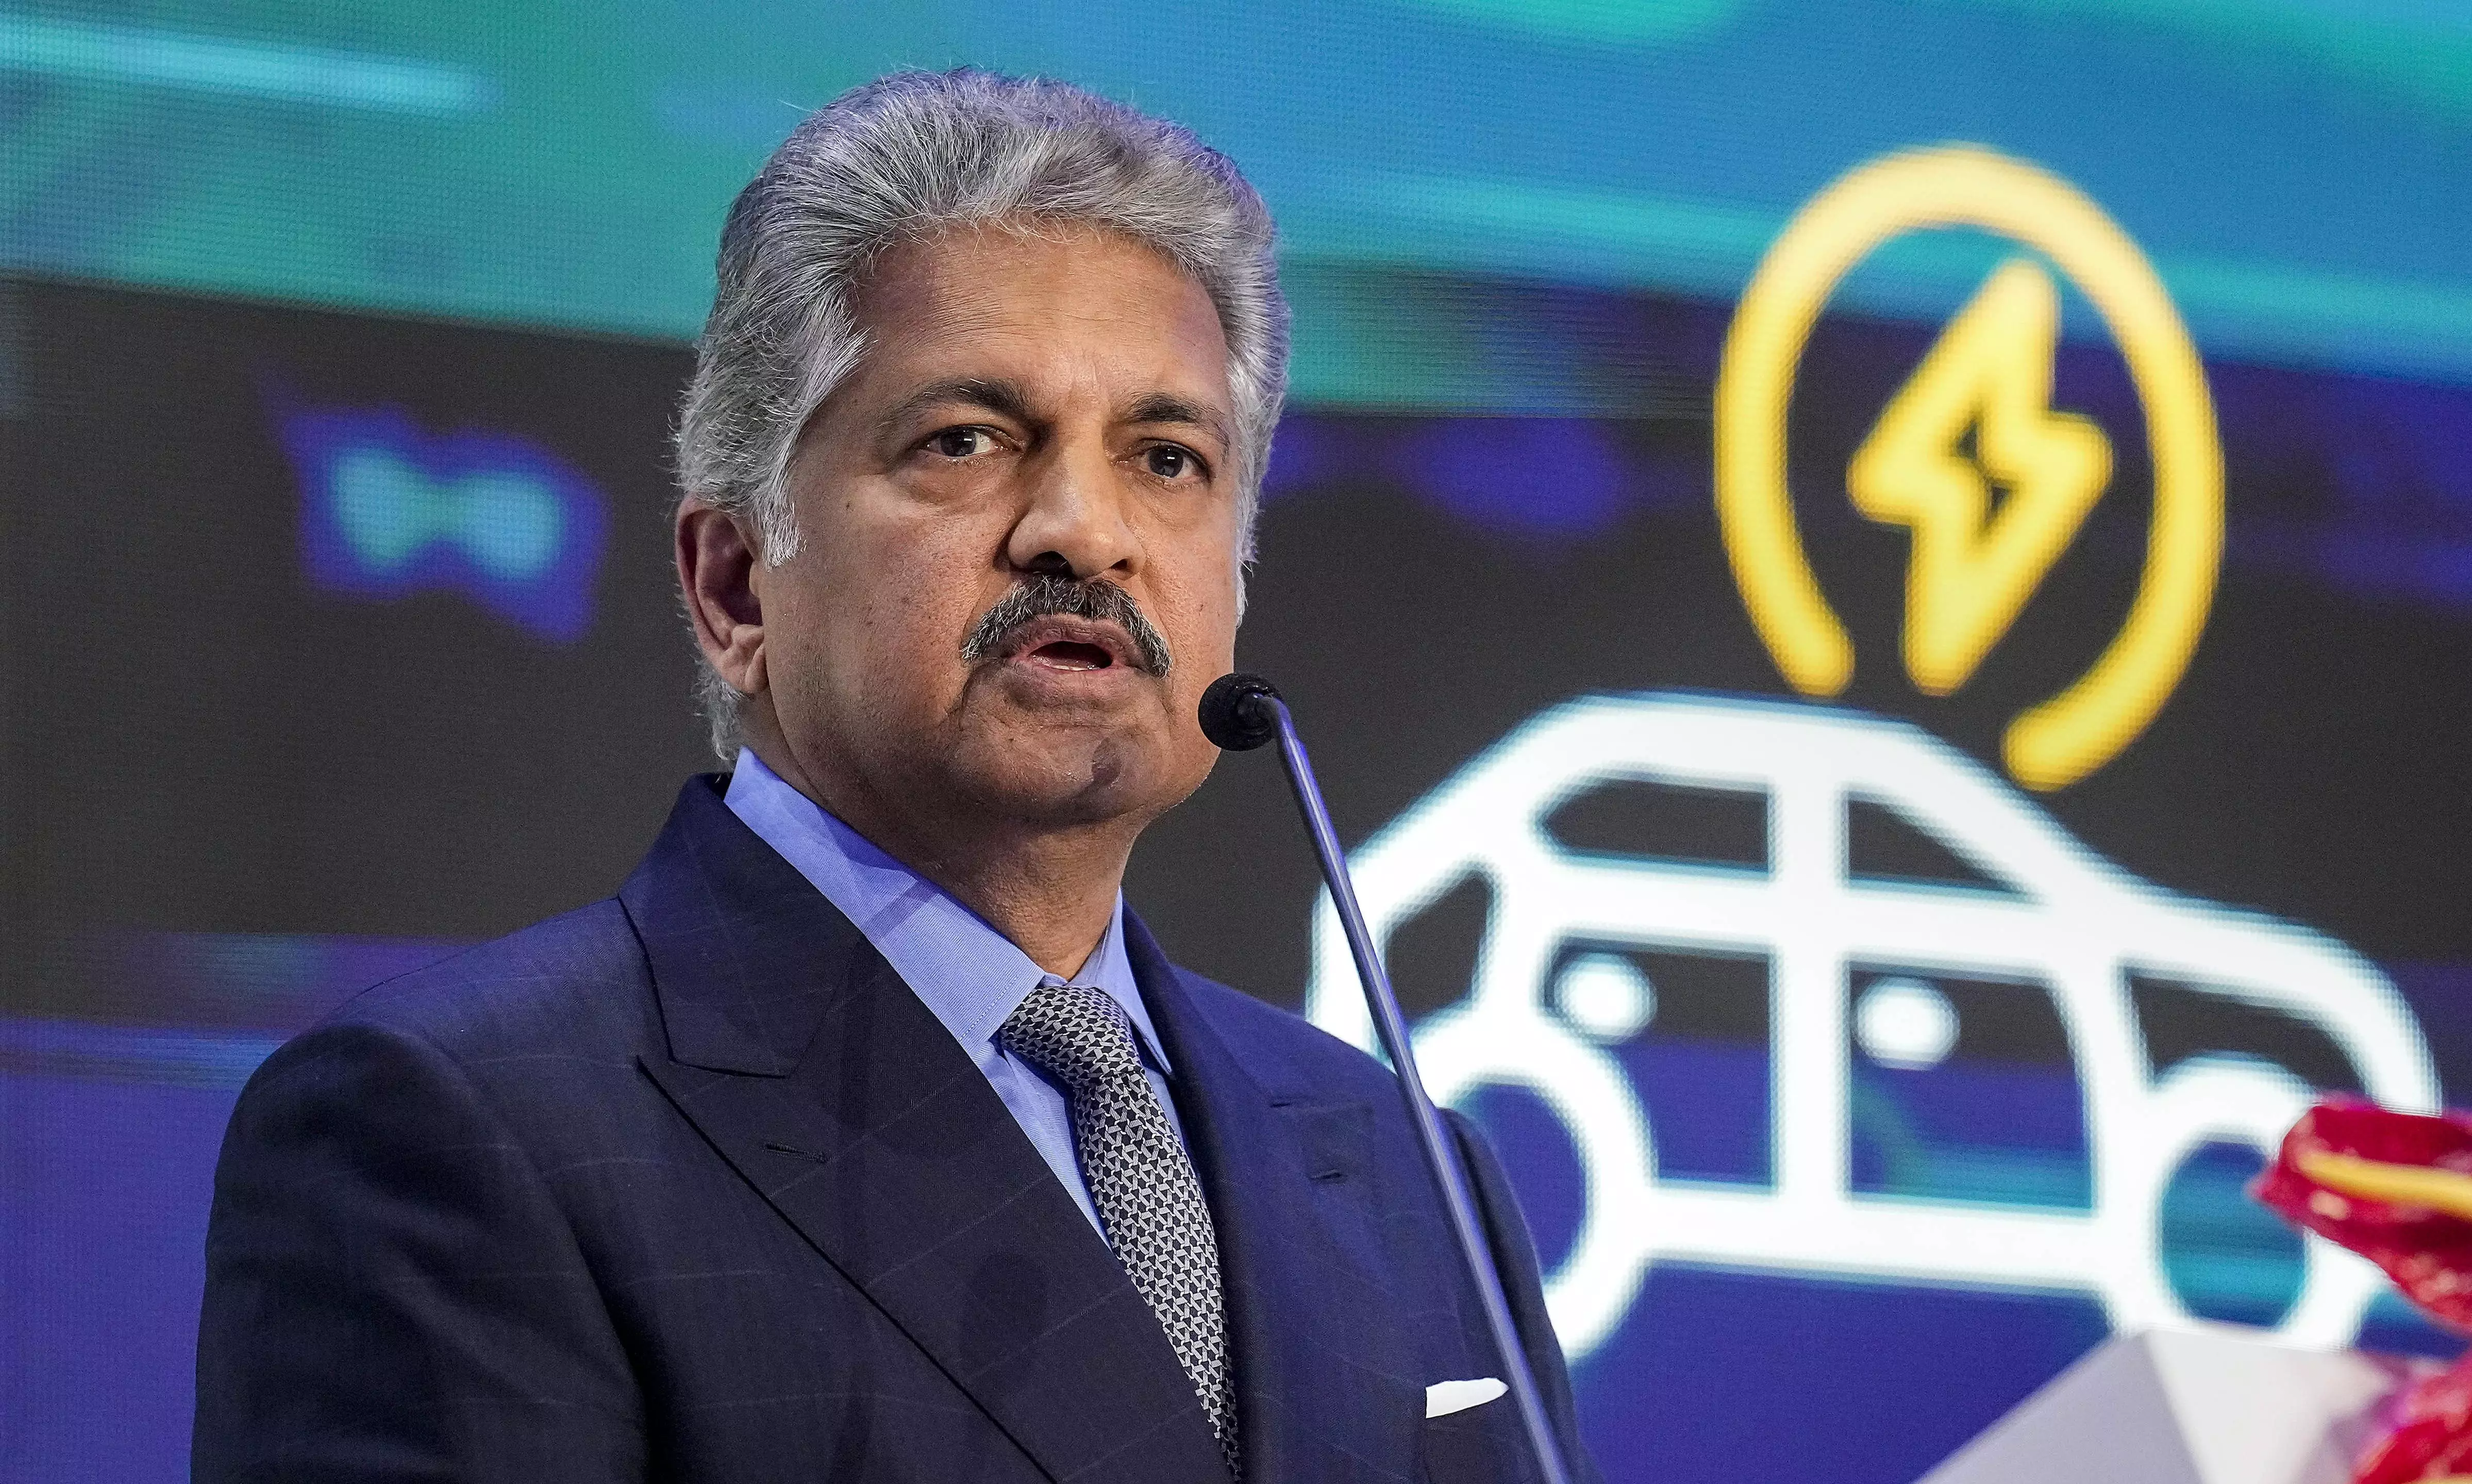 R&D centre in TN because of able bureaucracy, human resources: Anand Mahindra